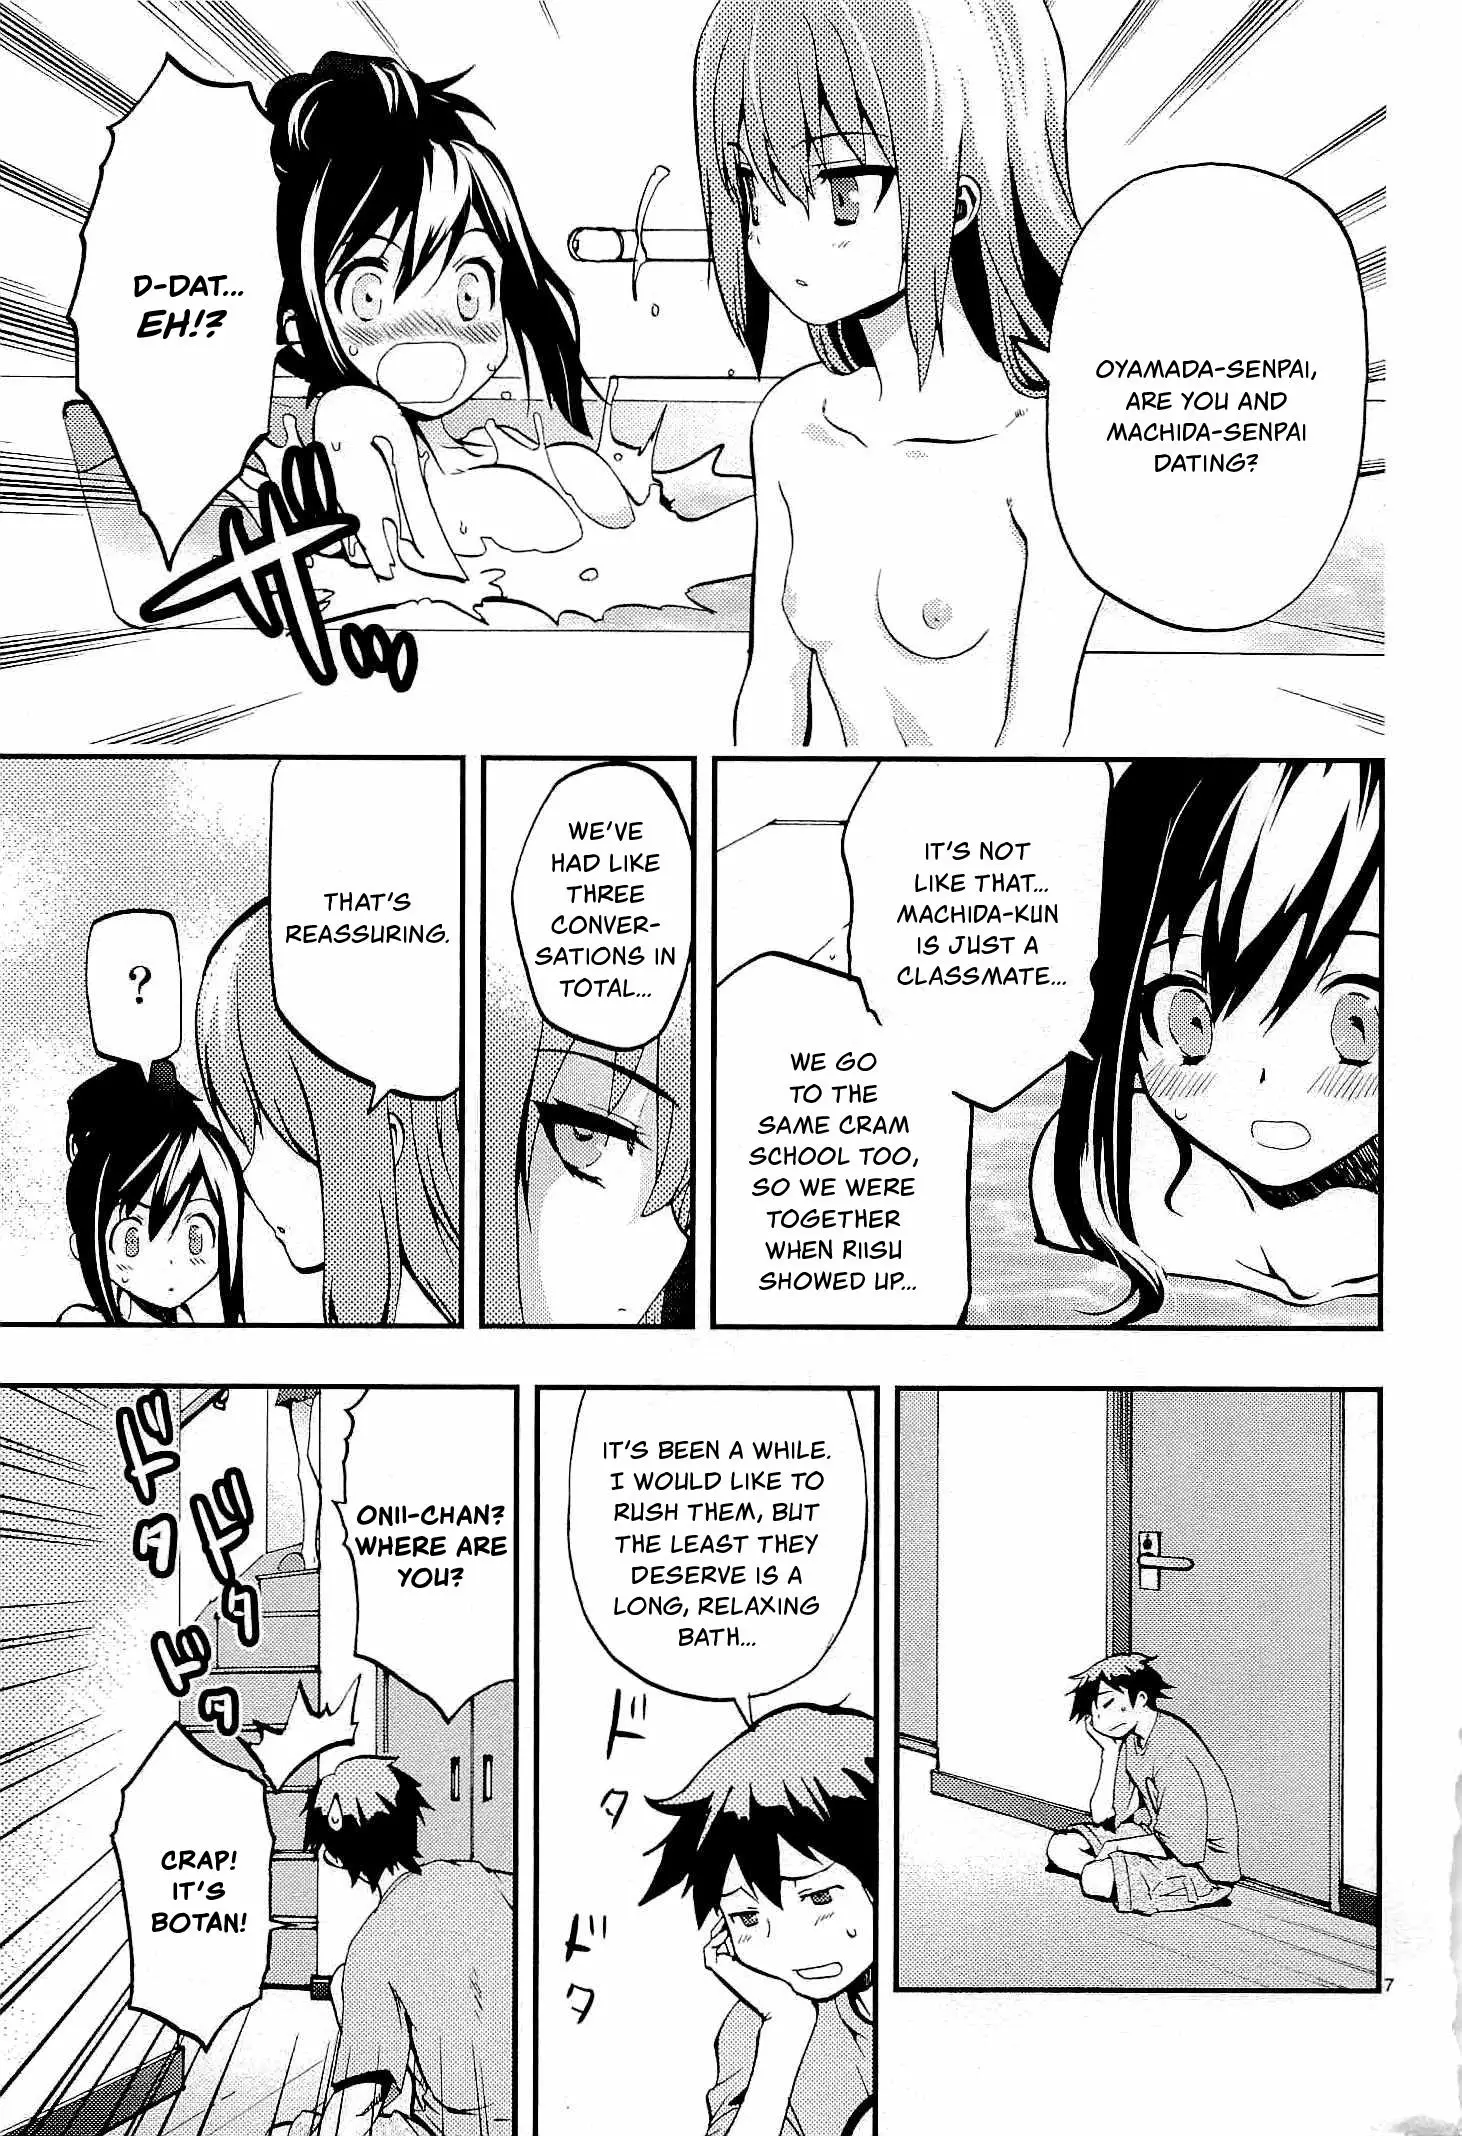 Card Girl! Maiden Summoning Undressing Wars - 3 page 7-3686f09d